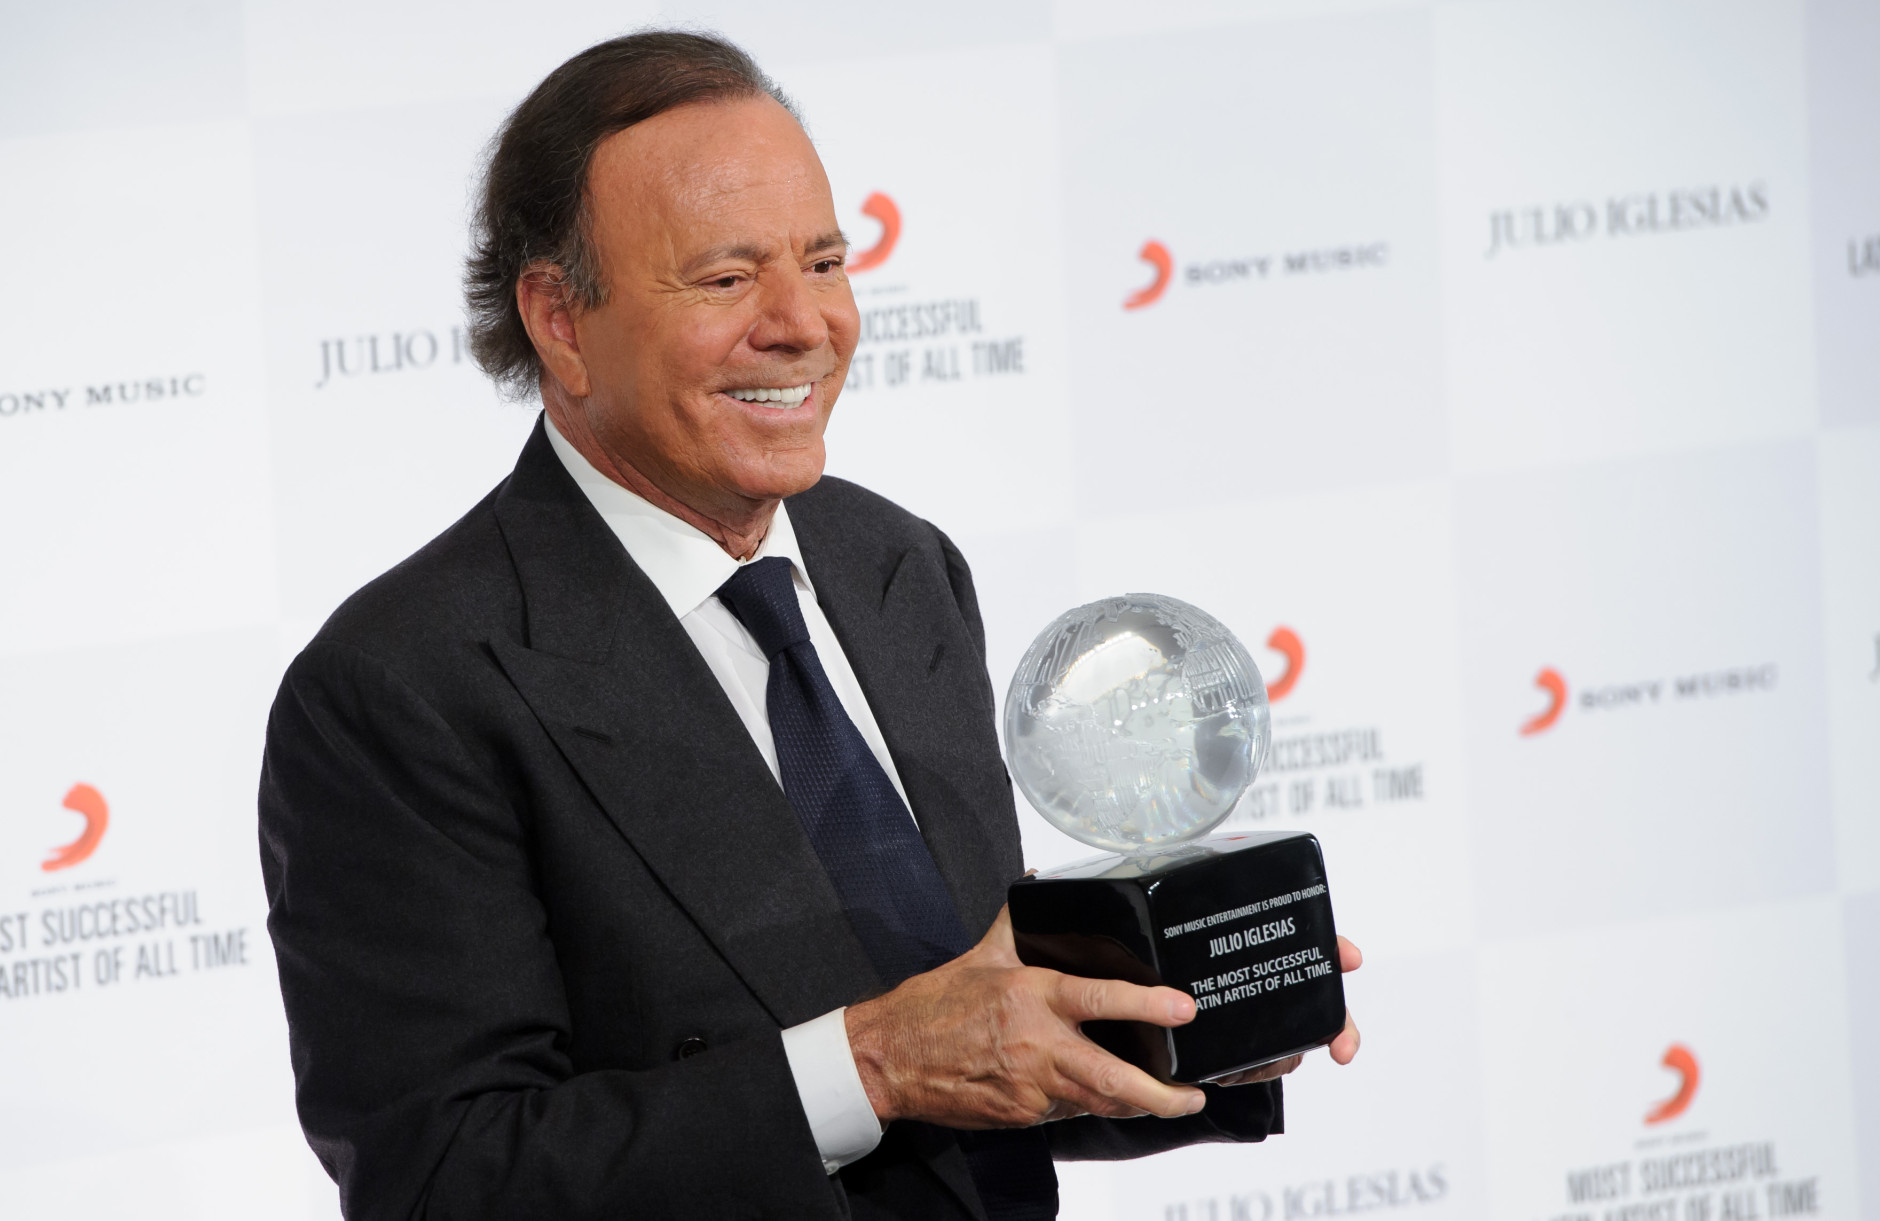 Spanish singer Julio Iglesias poses for photographers poses at a press conference with his award after being named the 'Most Successful Latin Artist of All Time',  at a central London venue, Monday, May 12, 2014. (Photo by Jonathan Short/Invision/AP)